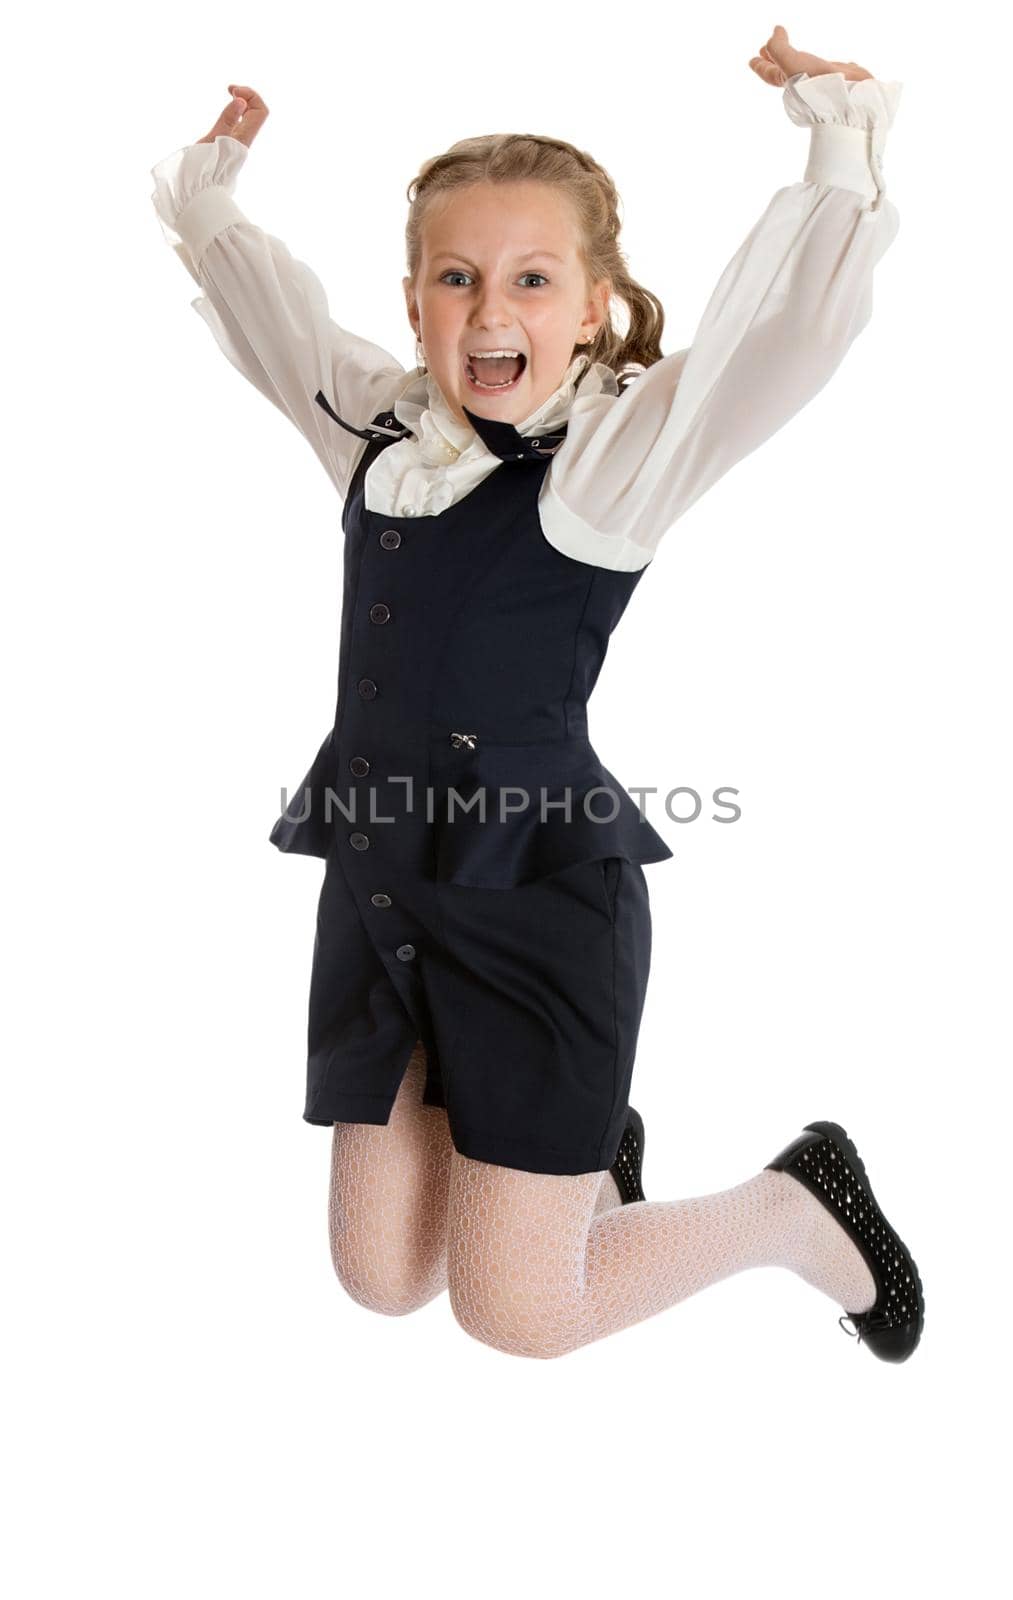 Stylish little girl in a black suit. Girl jumping raising his hands up - Isolated on white background